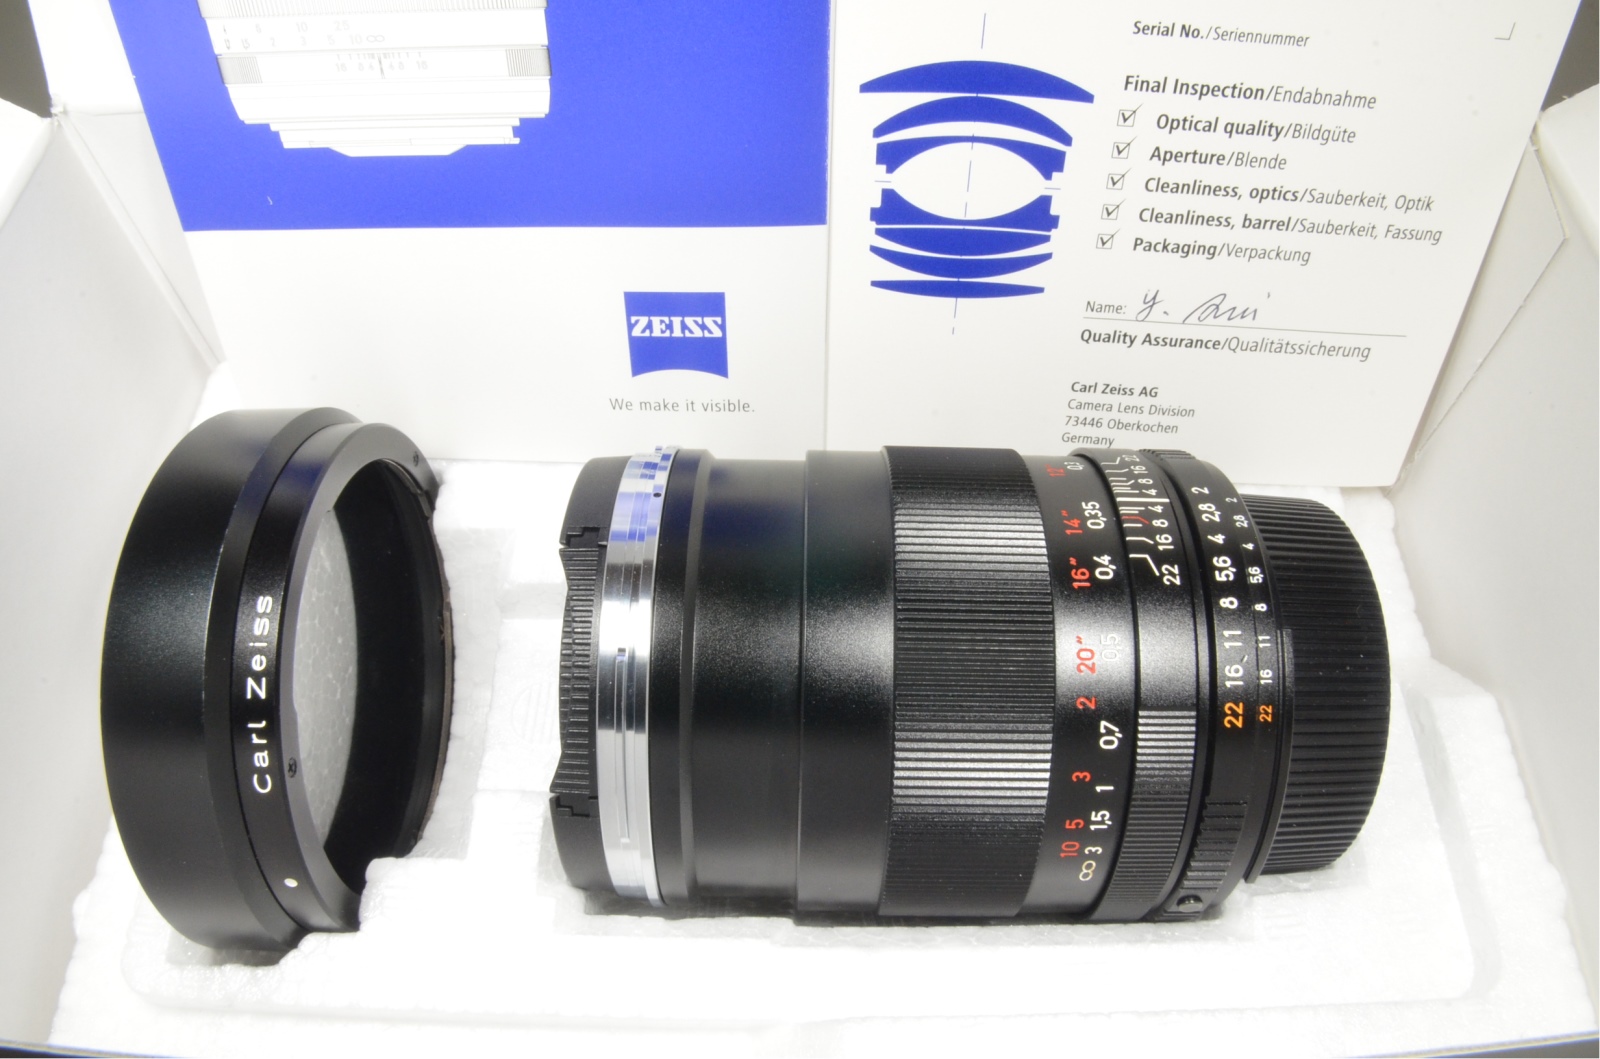 carl zeiss distagon t* 35mm f2 zf.2 lens for nikon in boxed from japan